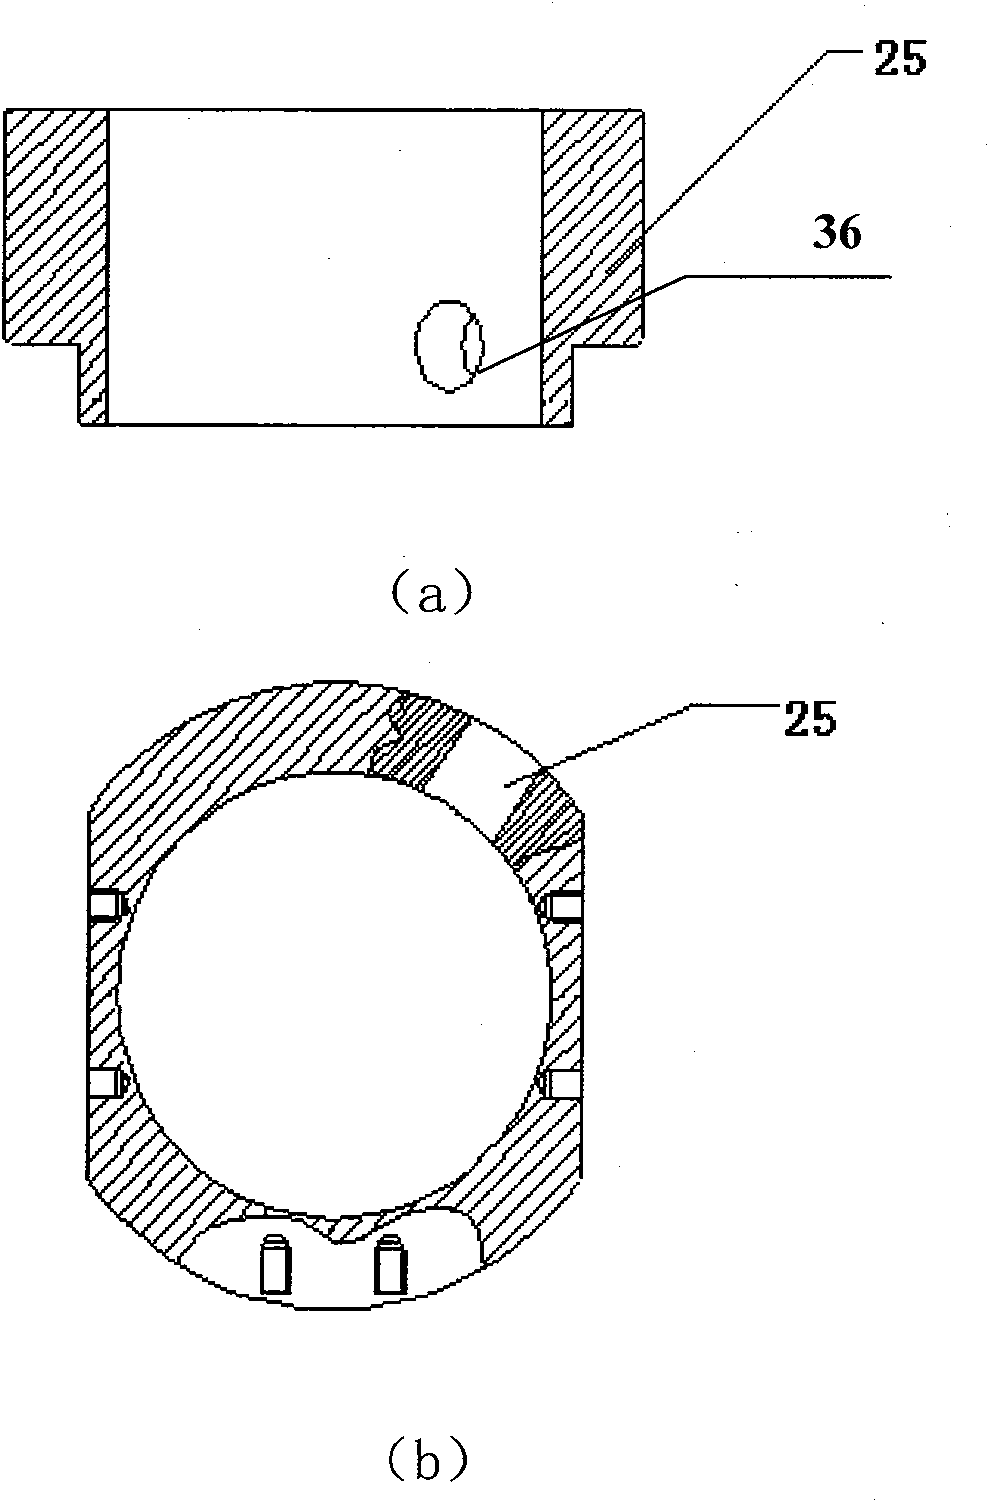 Rock-fill material weathering instrument